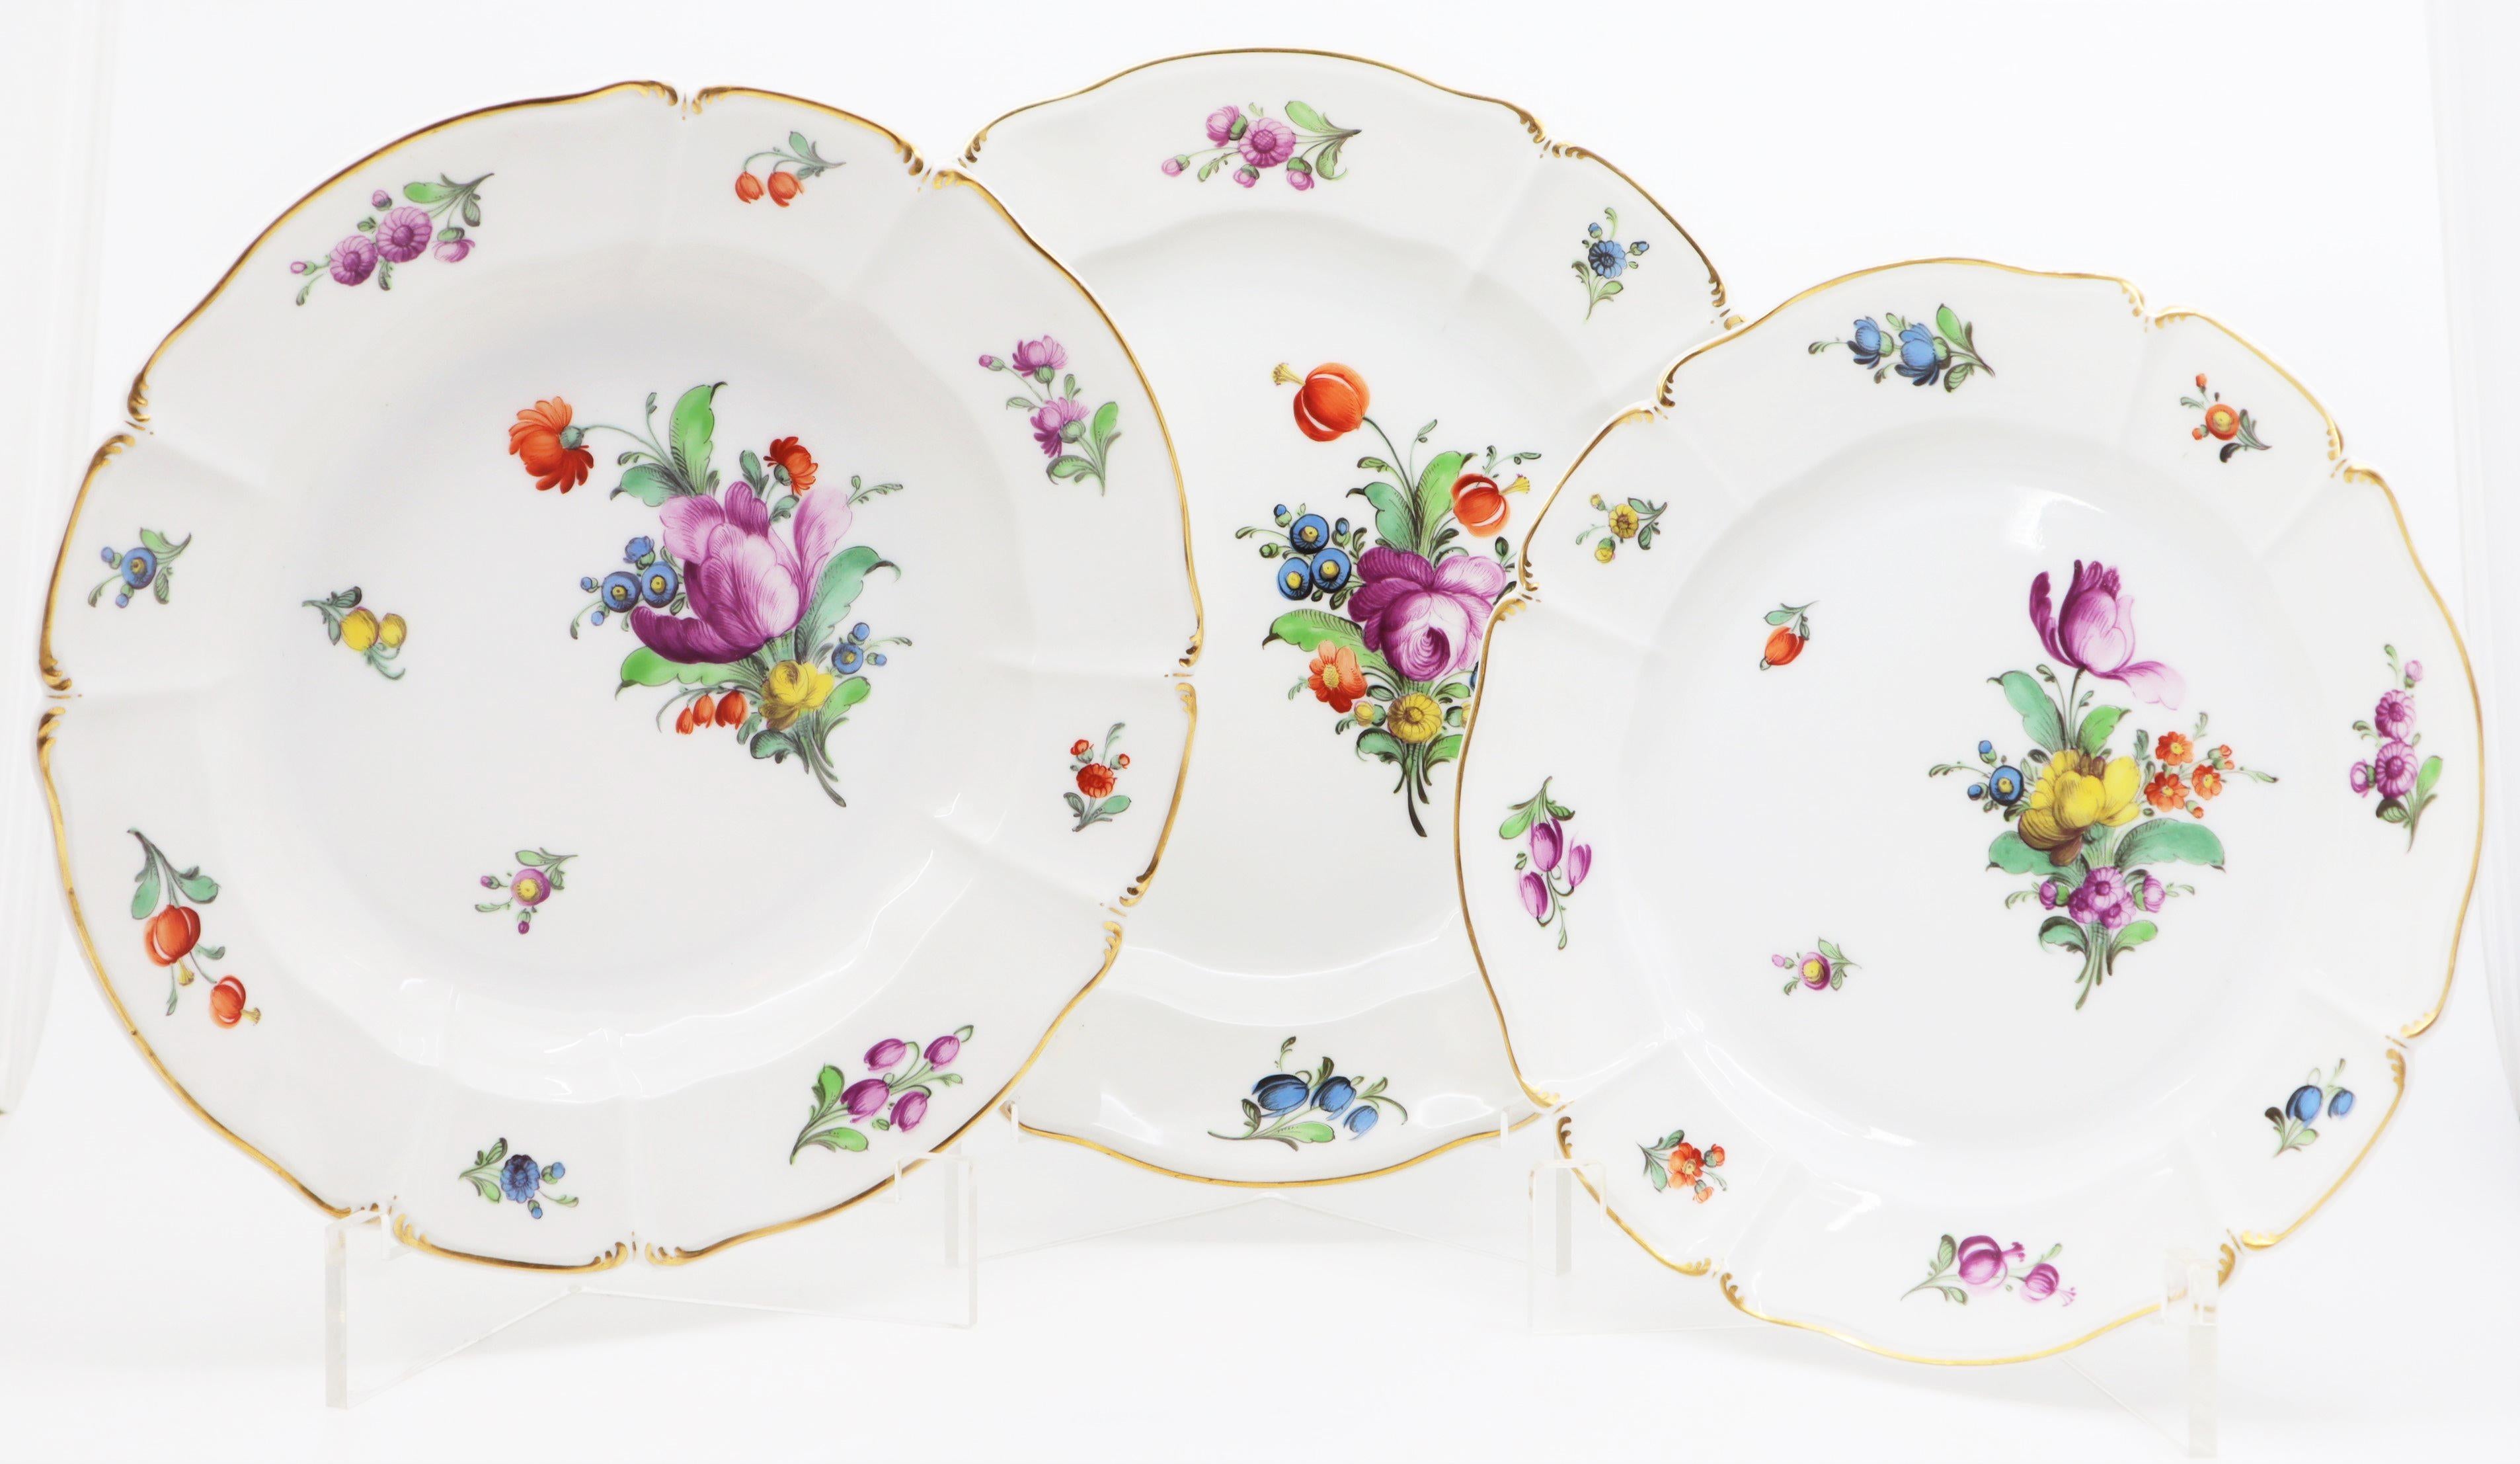 Dinner Service, 19th Century Porcelain, German, Hand Painted with Flowers Décor 13